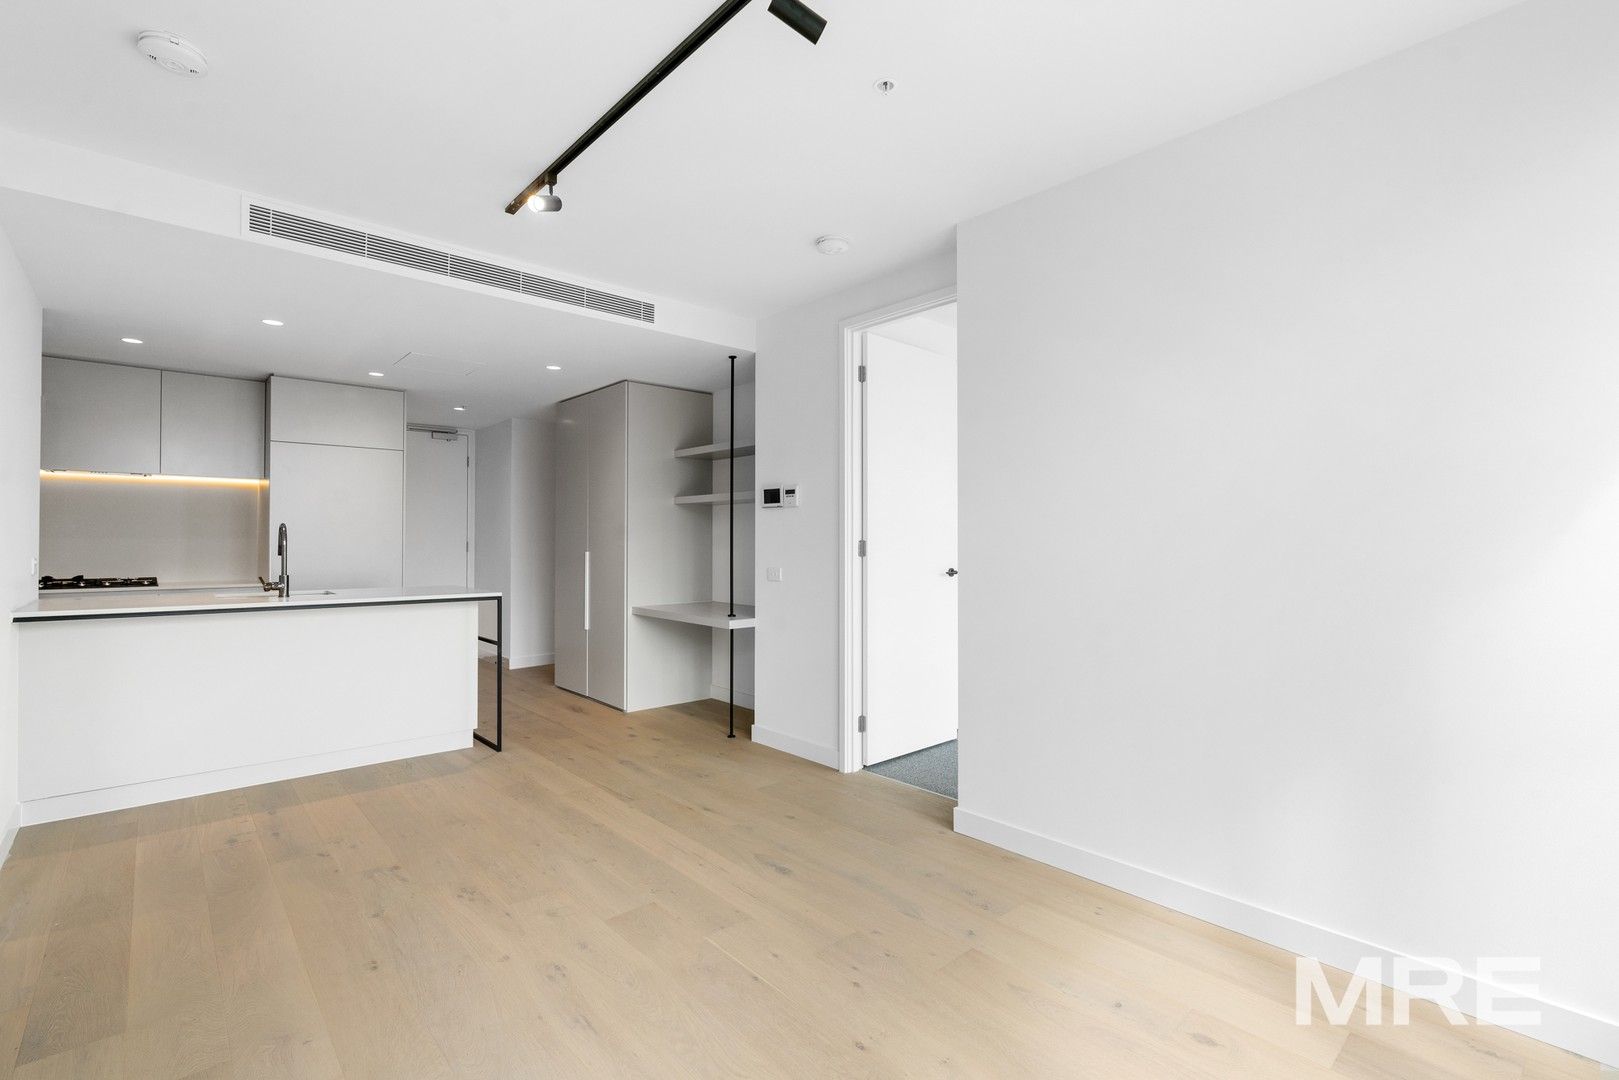 2 bedrooms Apartment / Unit / Flat in 504/41 Bank Street SOUTH MELBOURNE VIC, 3205